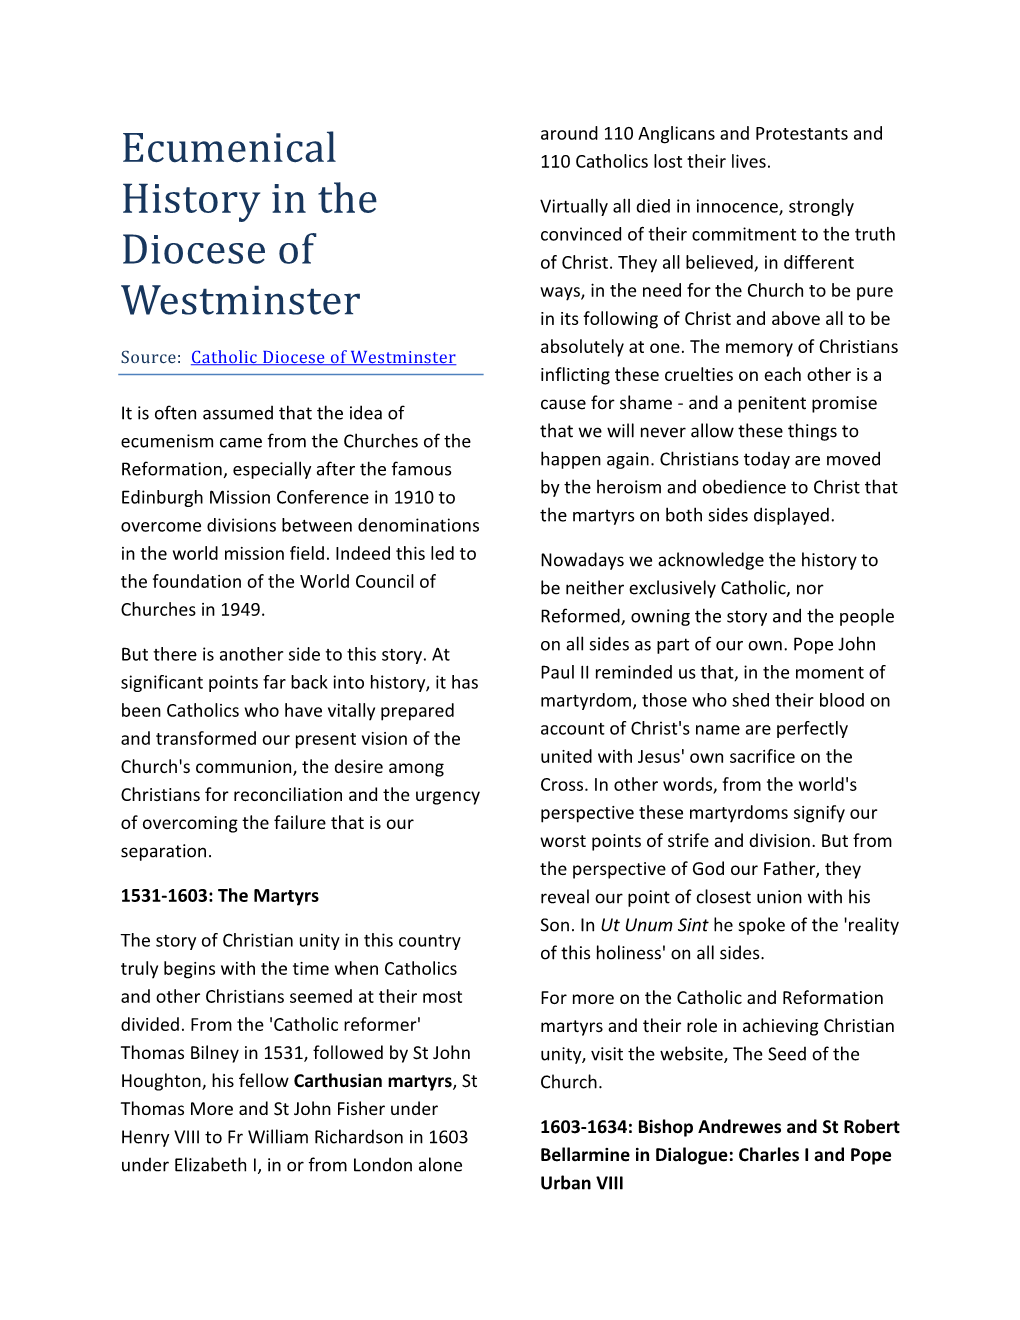 Ecumenical History in the Diocese of Westminster